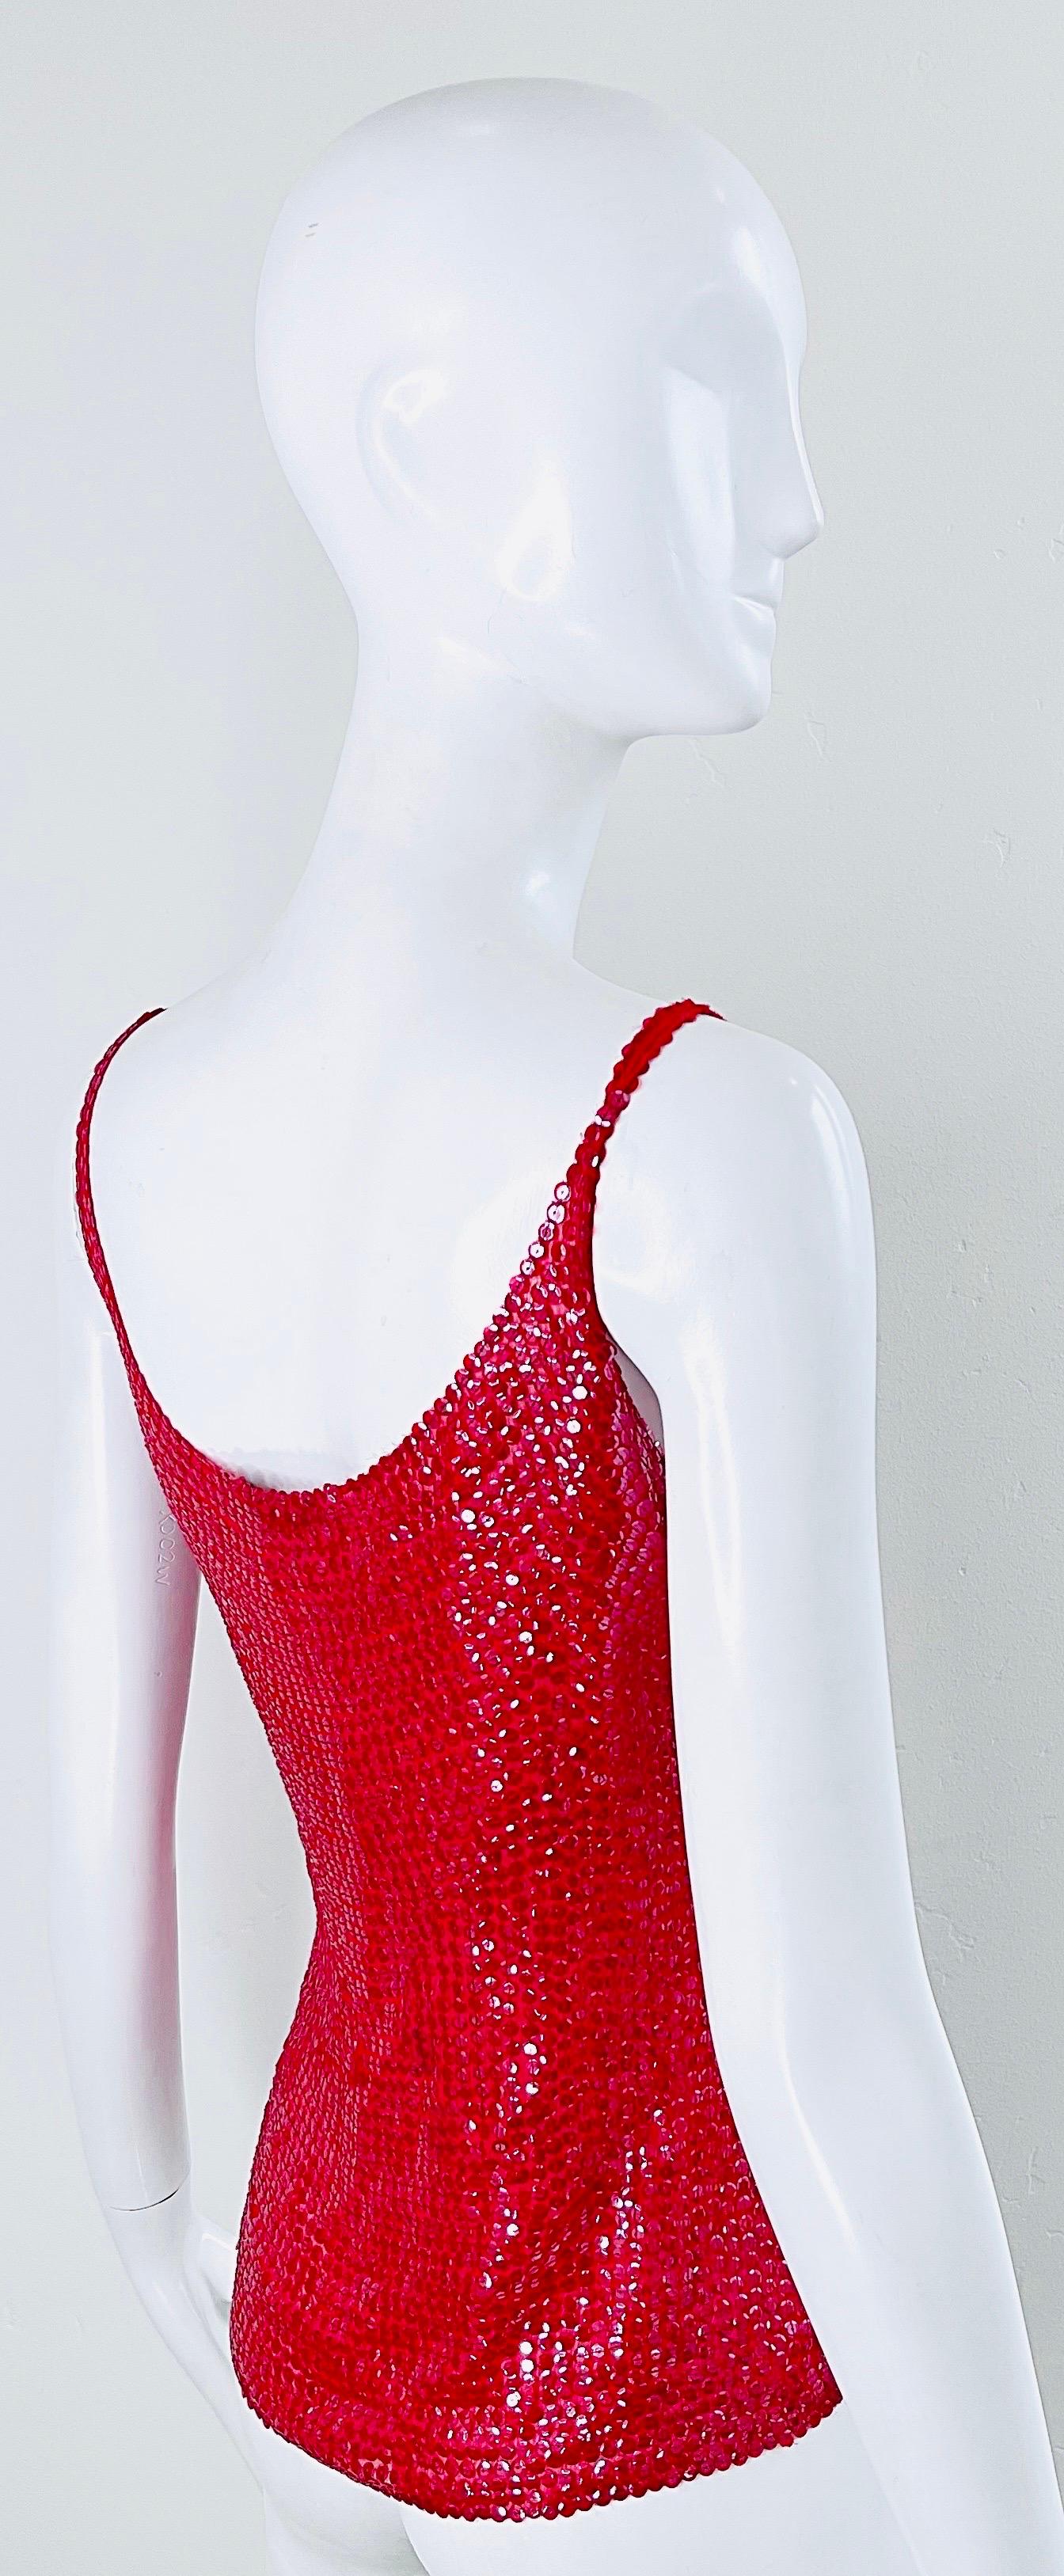 Halston 1970s Lipstick Red Silk Chiffon Fully Sequin Vintage 70s Sleeveless Top For Sale 4